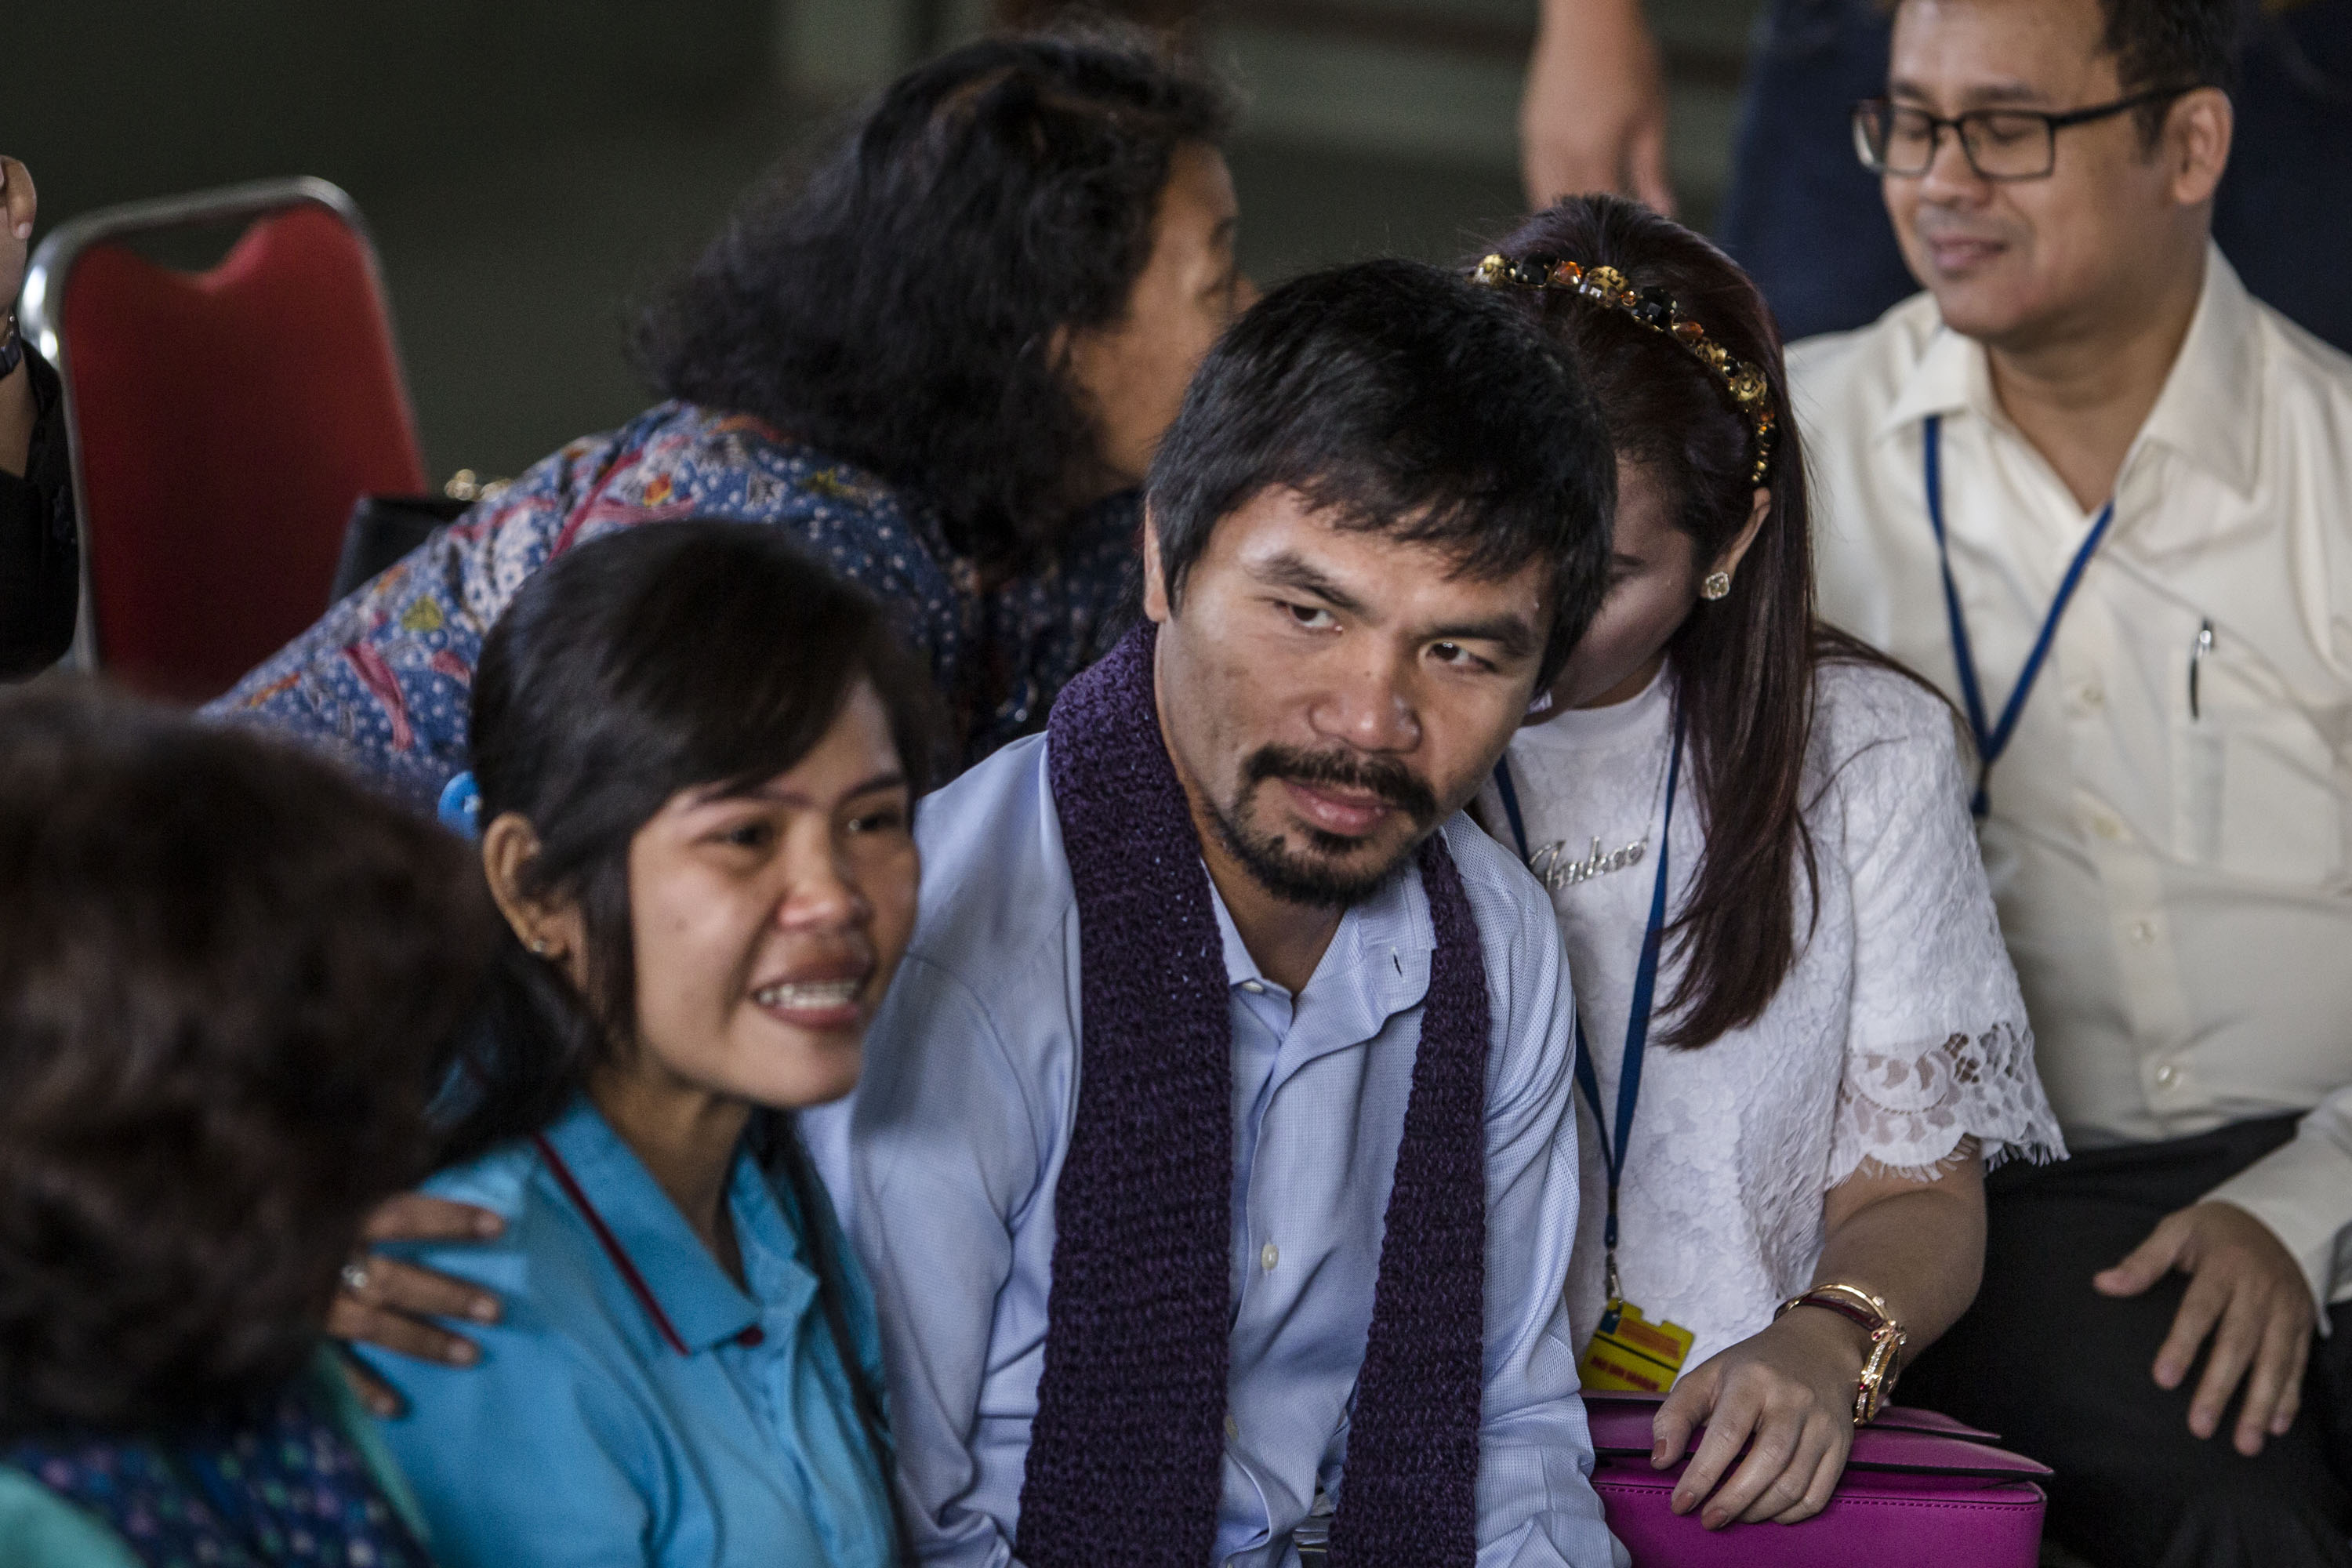 Filipino boxing icon Manny Pacquiao, center, and his wife Jinkee meet convicted drug trafficker Mary Jane Veloso of the Philippines during a visit at Wirogunan prison on July 10, 2015, in Yogyakarta, Indonesia (Ulet Ifansasti—Getty Images)